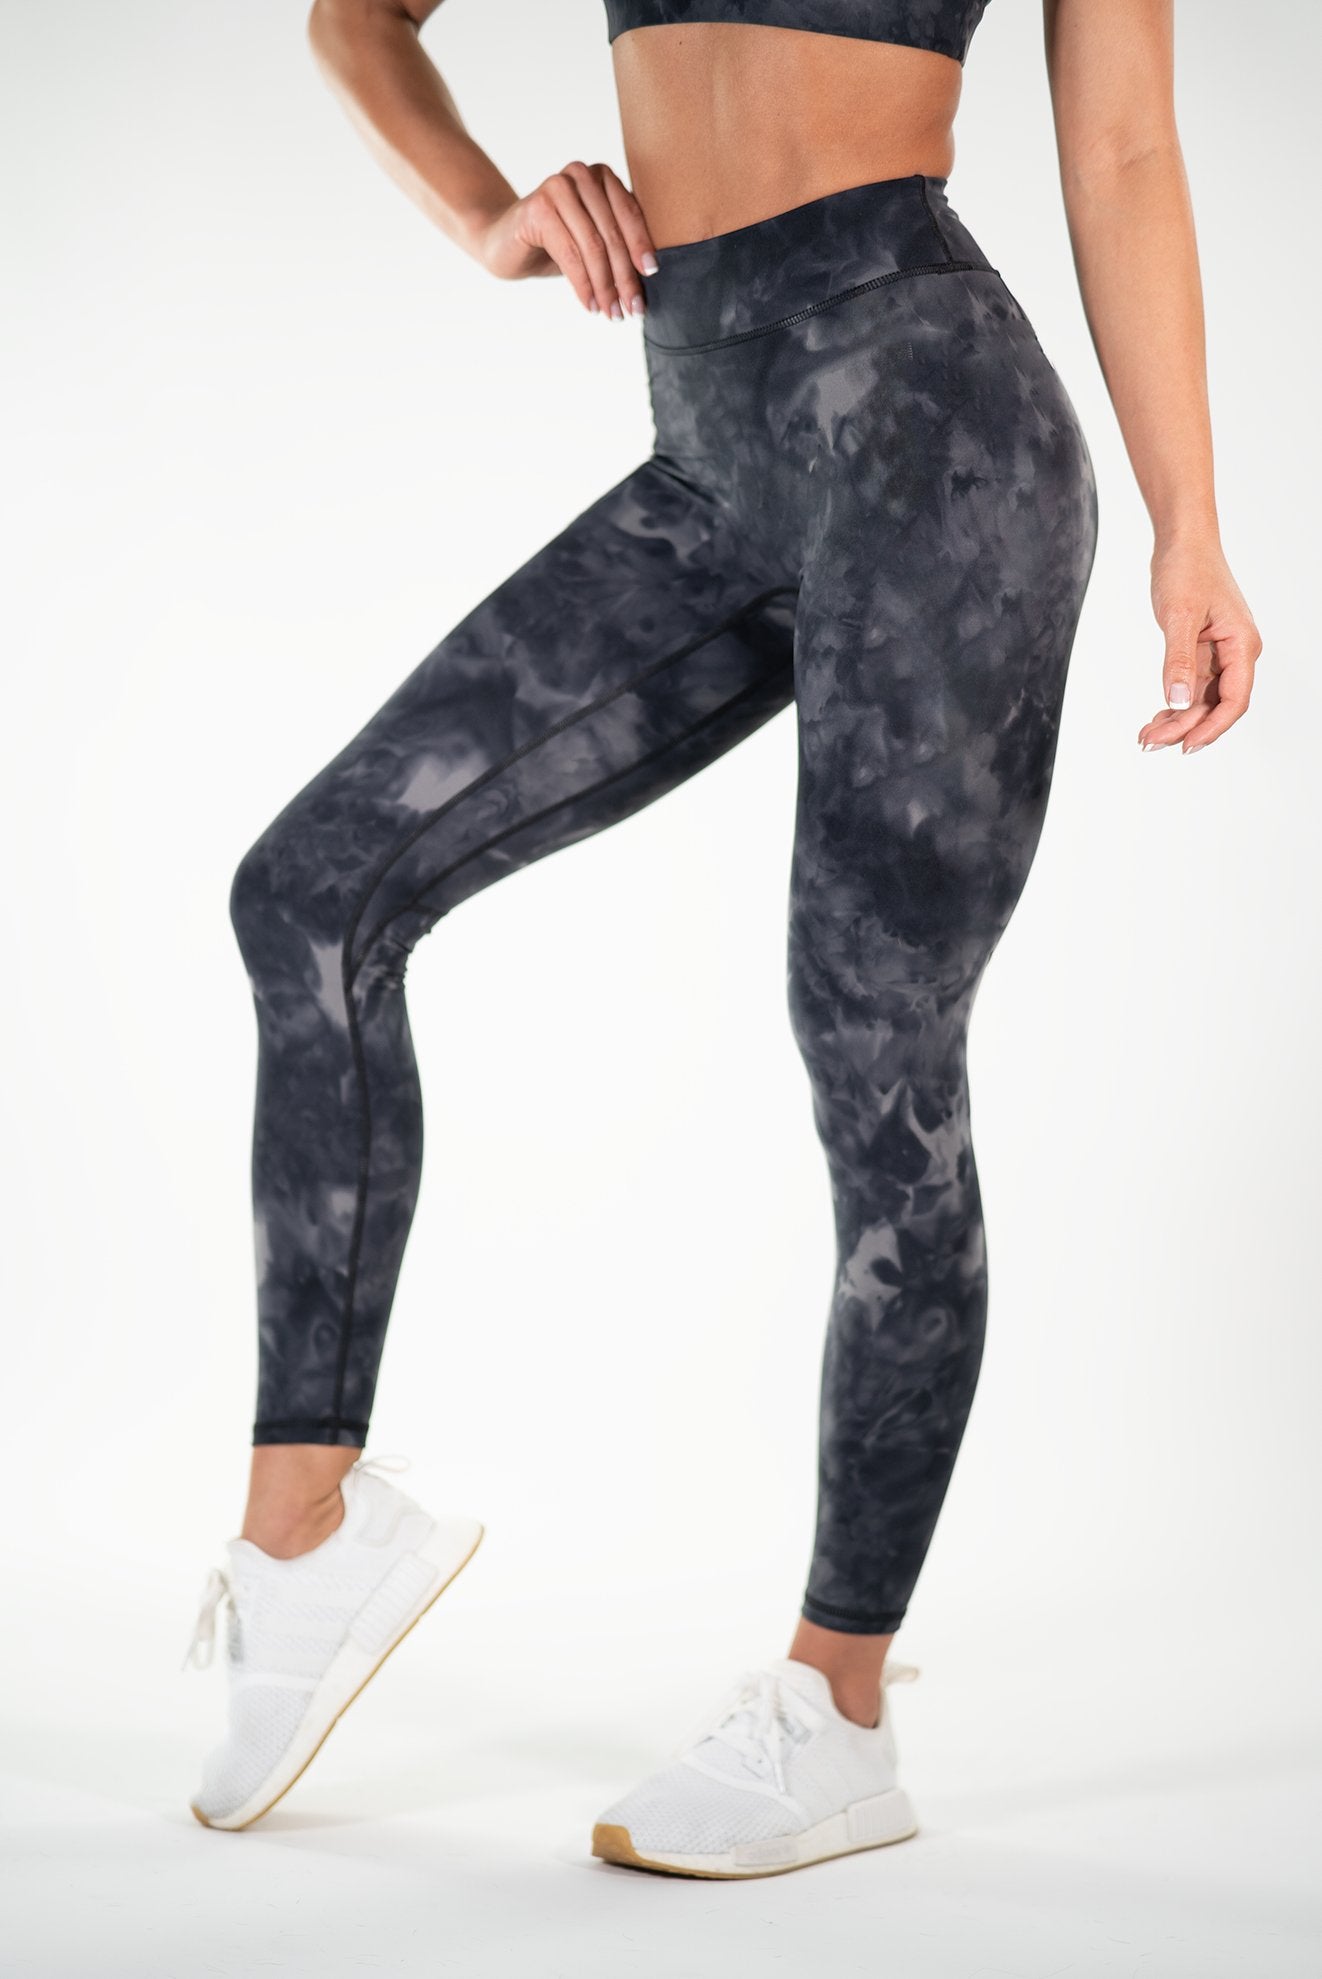 Galaxy WORKOUT Leggings – Brave New Look